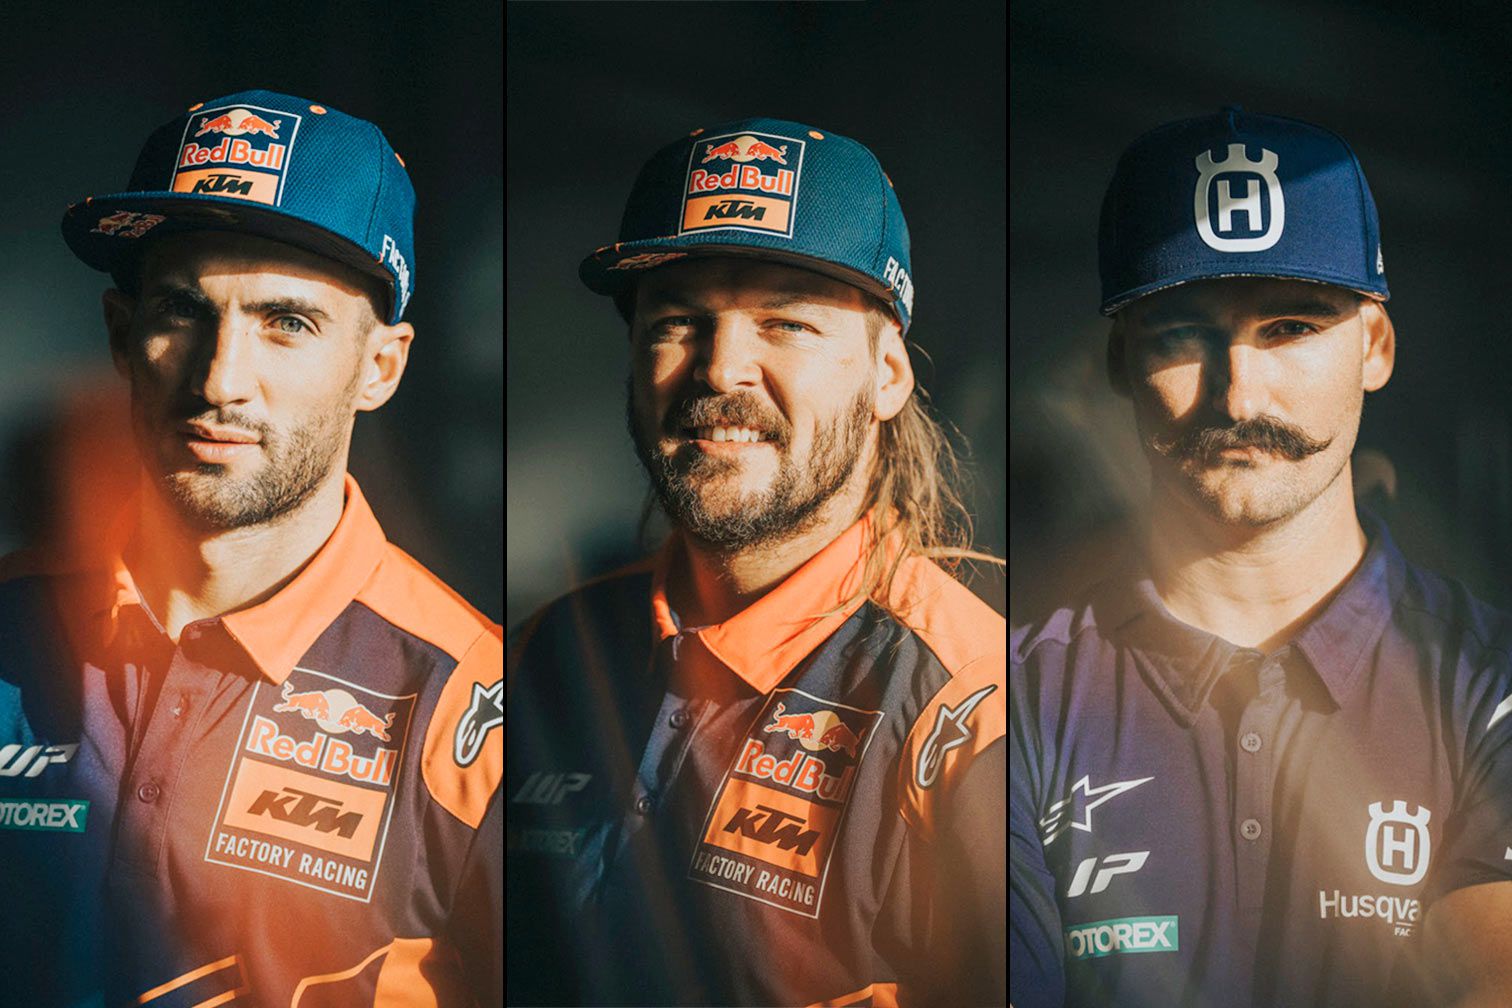 The Dakar 2023 podium finishers, from headshots taken before they’d raced a single mile. Kevin Benavides (ARG), Toby Price (AUS), and Skyler “Mustache Man” Howes (USA).